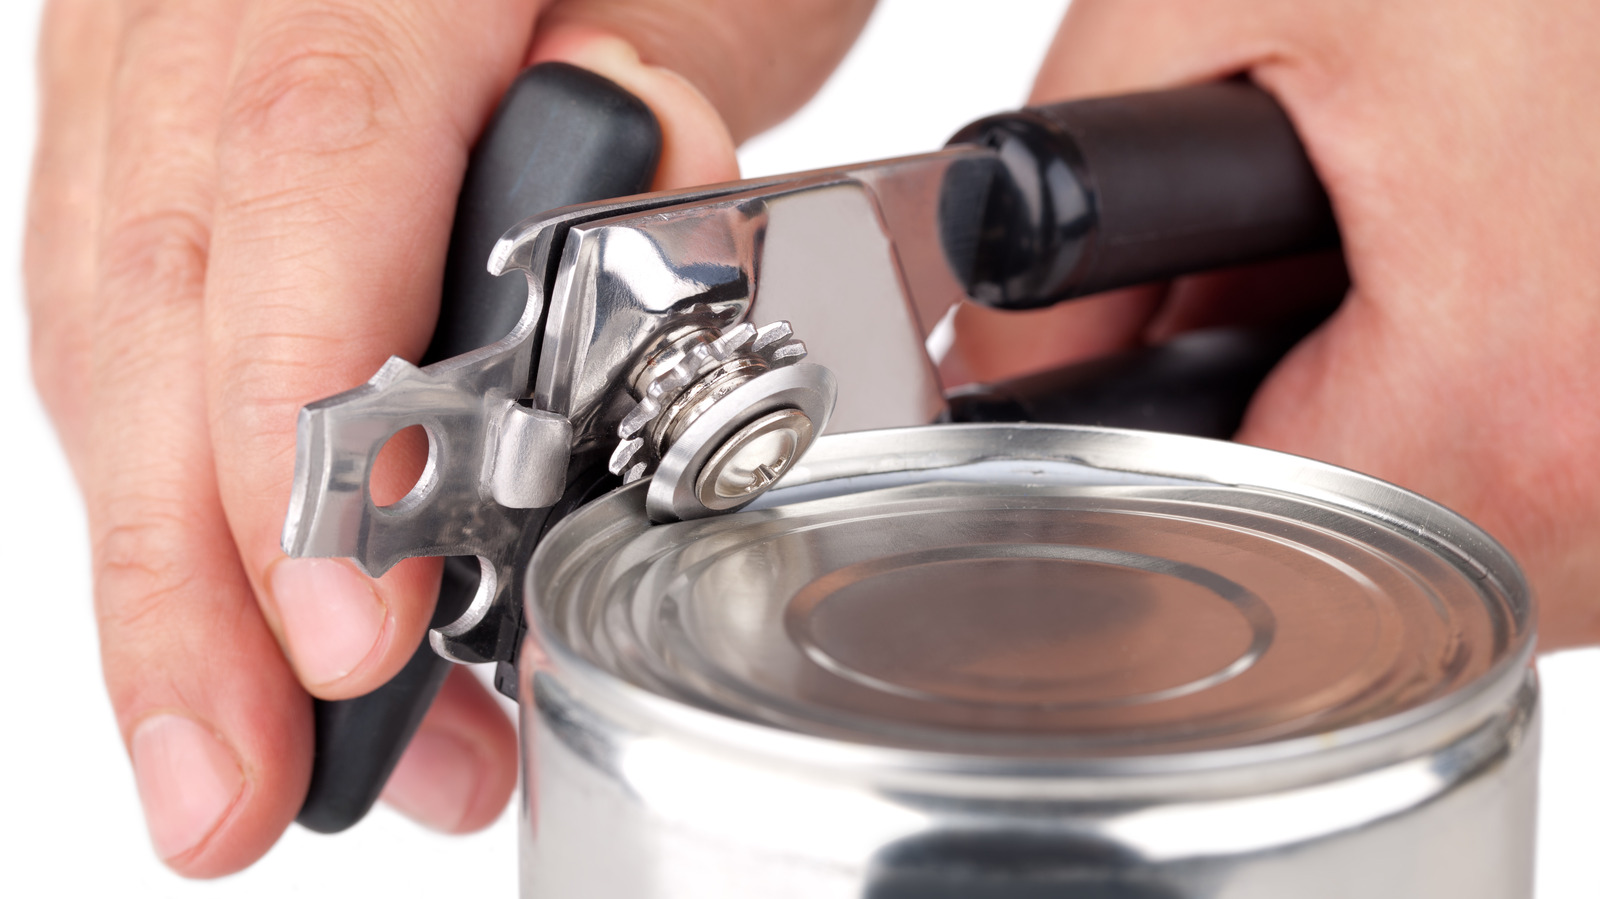 The Best Manual Can Openers In 2022